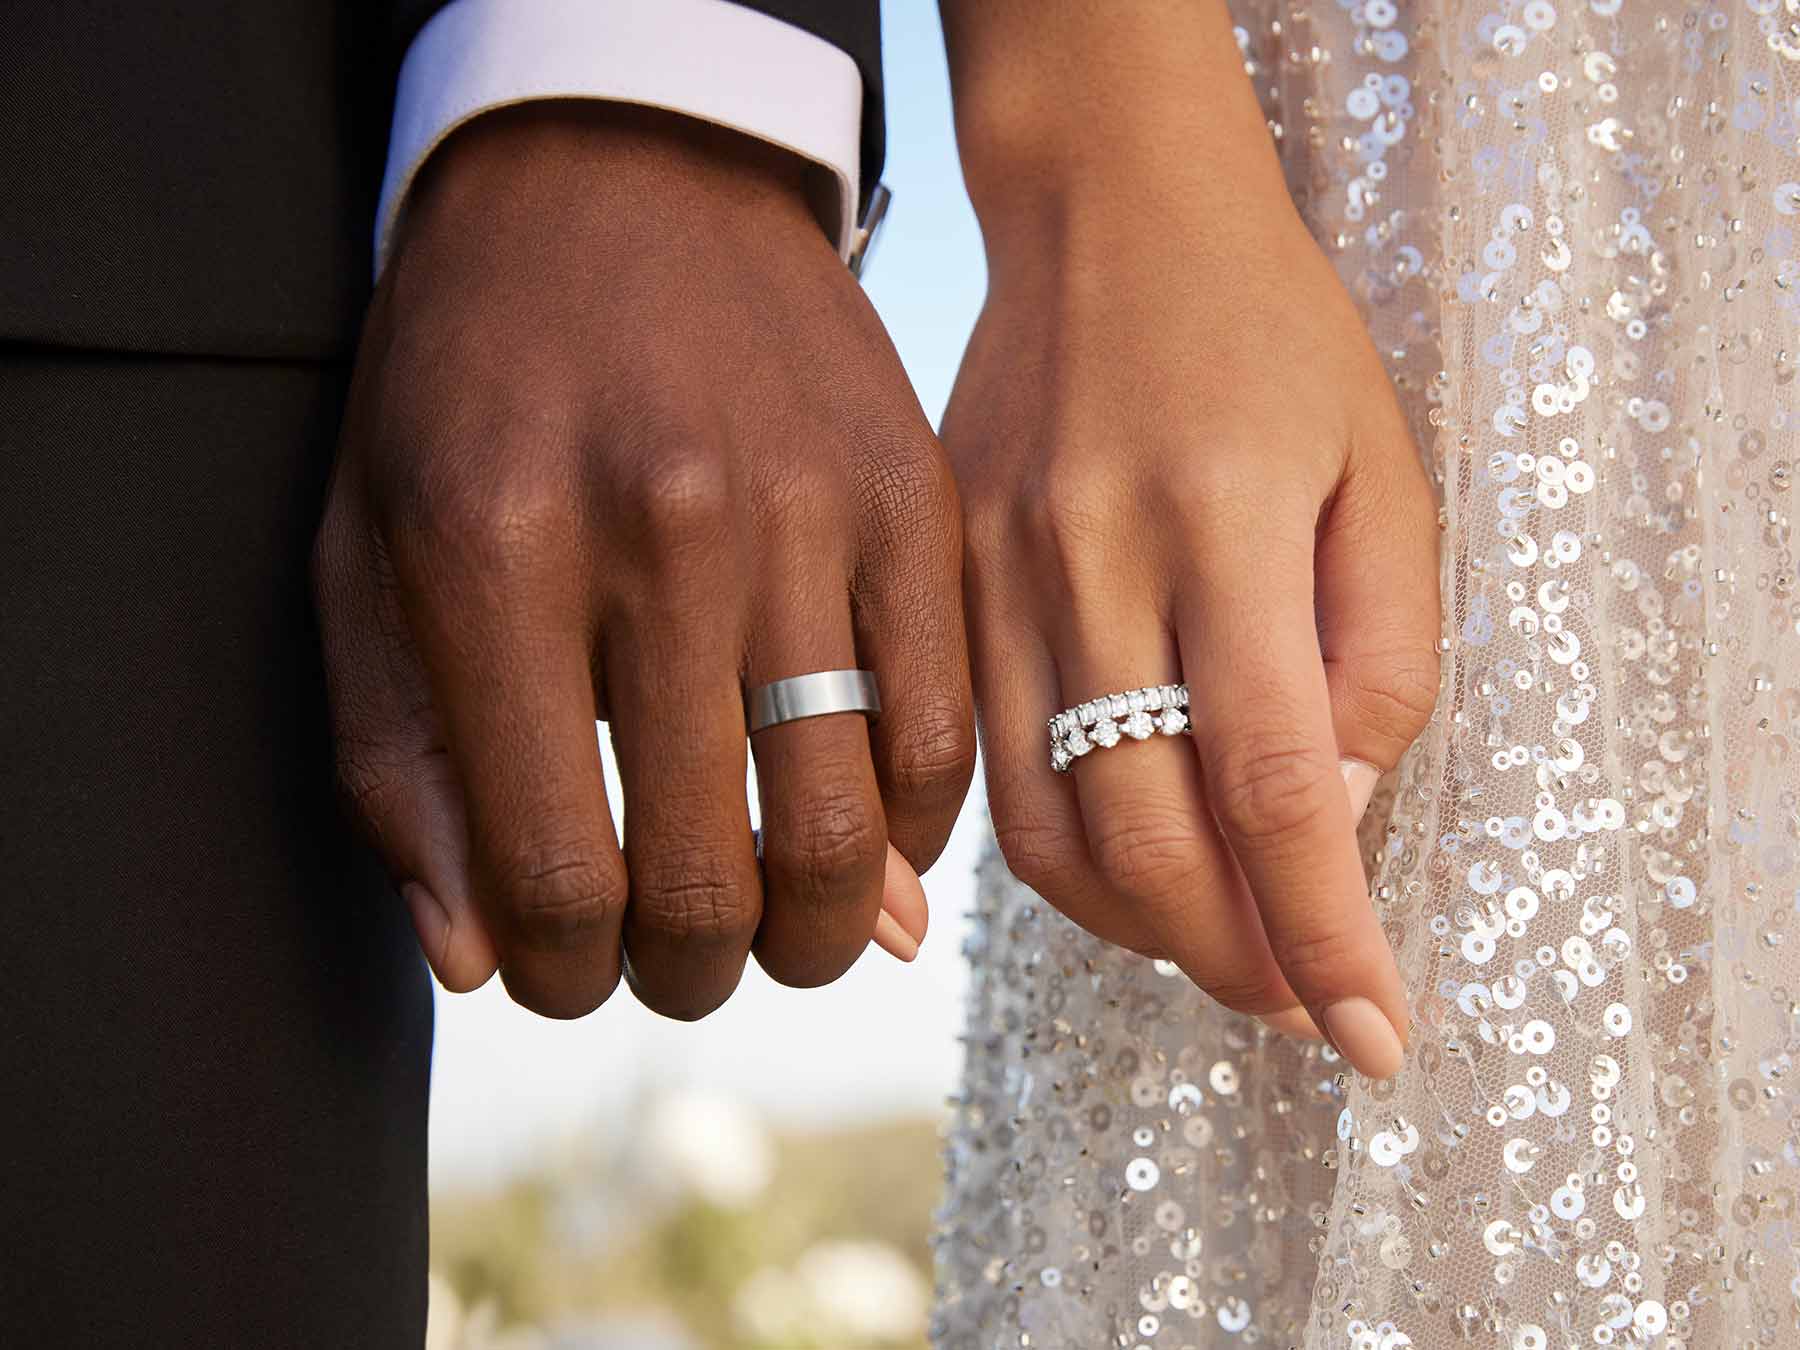 Which Hand Does the Engagement Ring Go On? | With Clarity